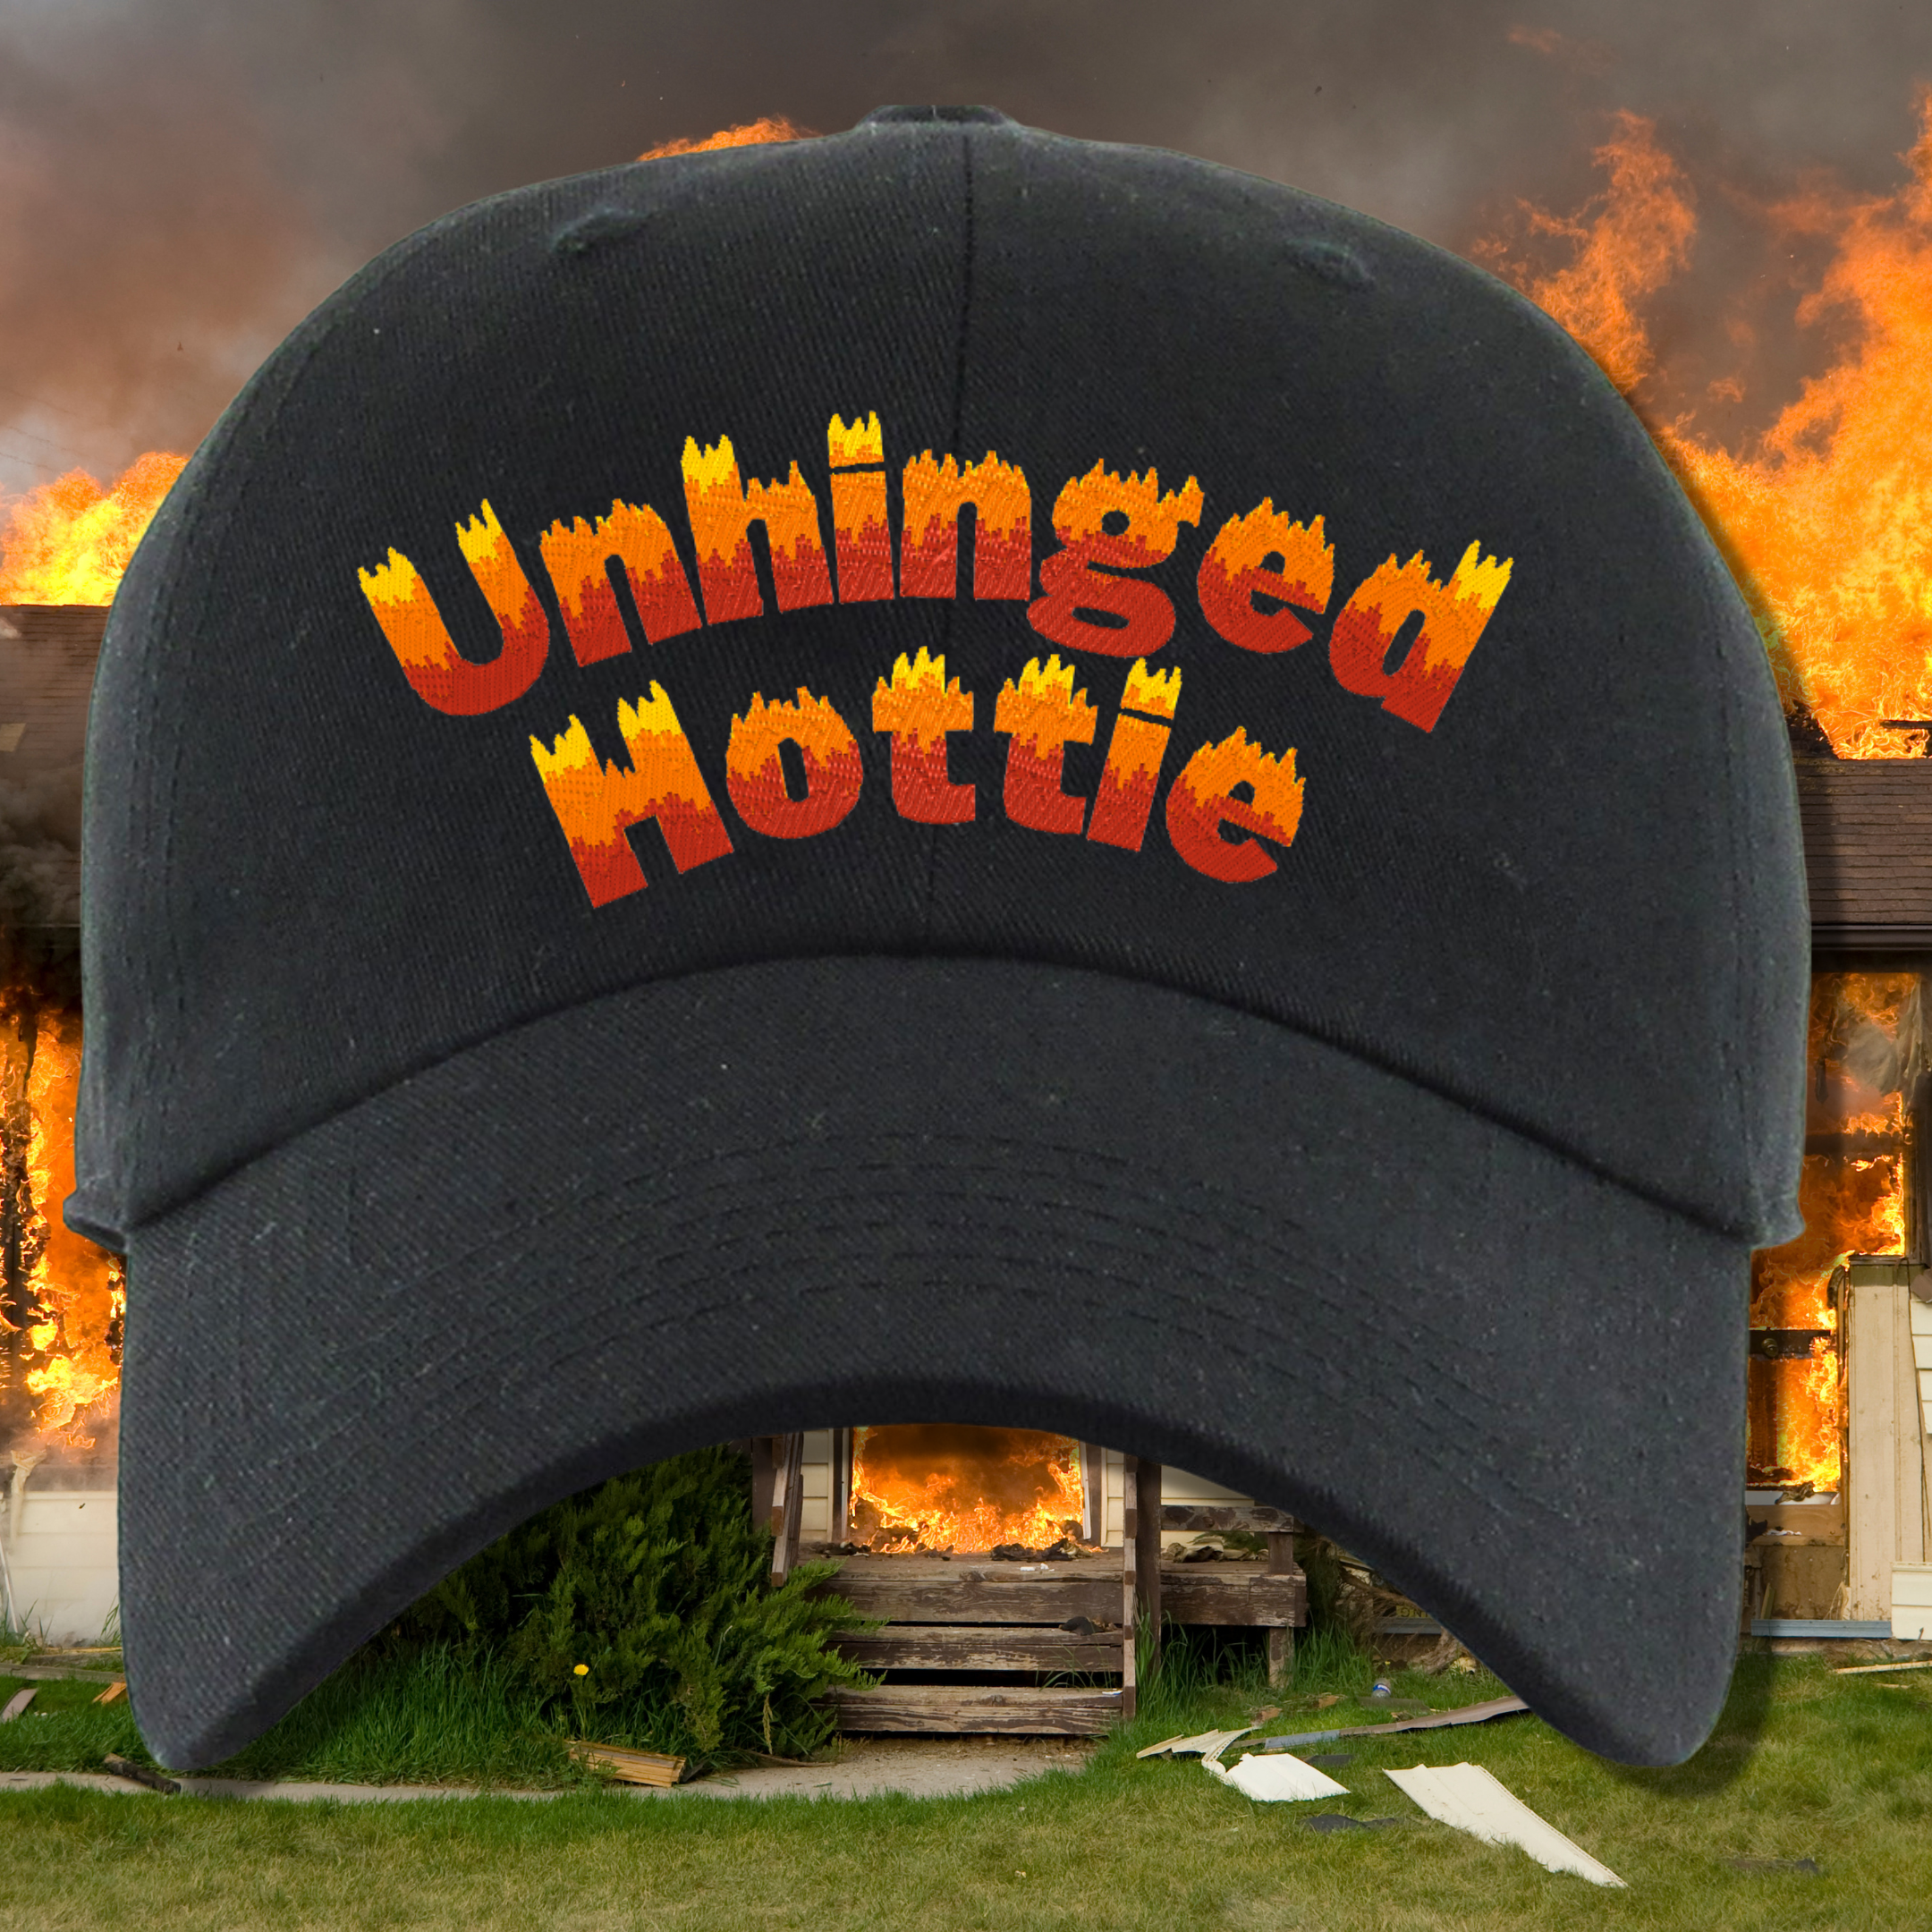 Unhinged Hottie Flame Font Embroidered Black Dad Hat, One Size Fits All